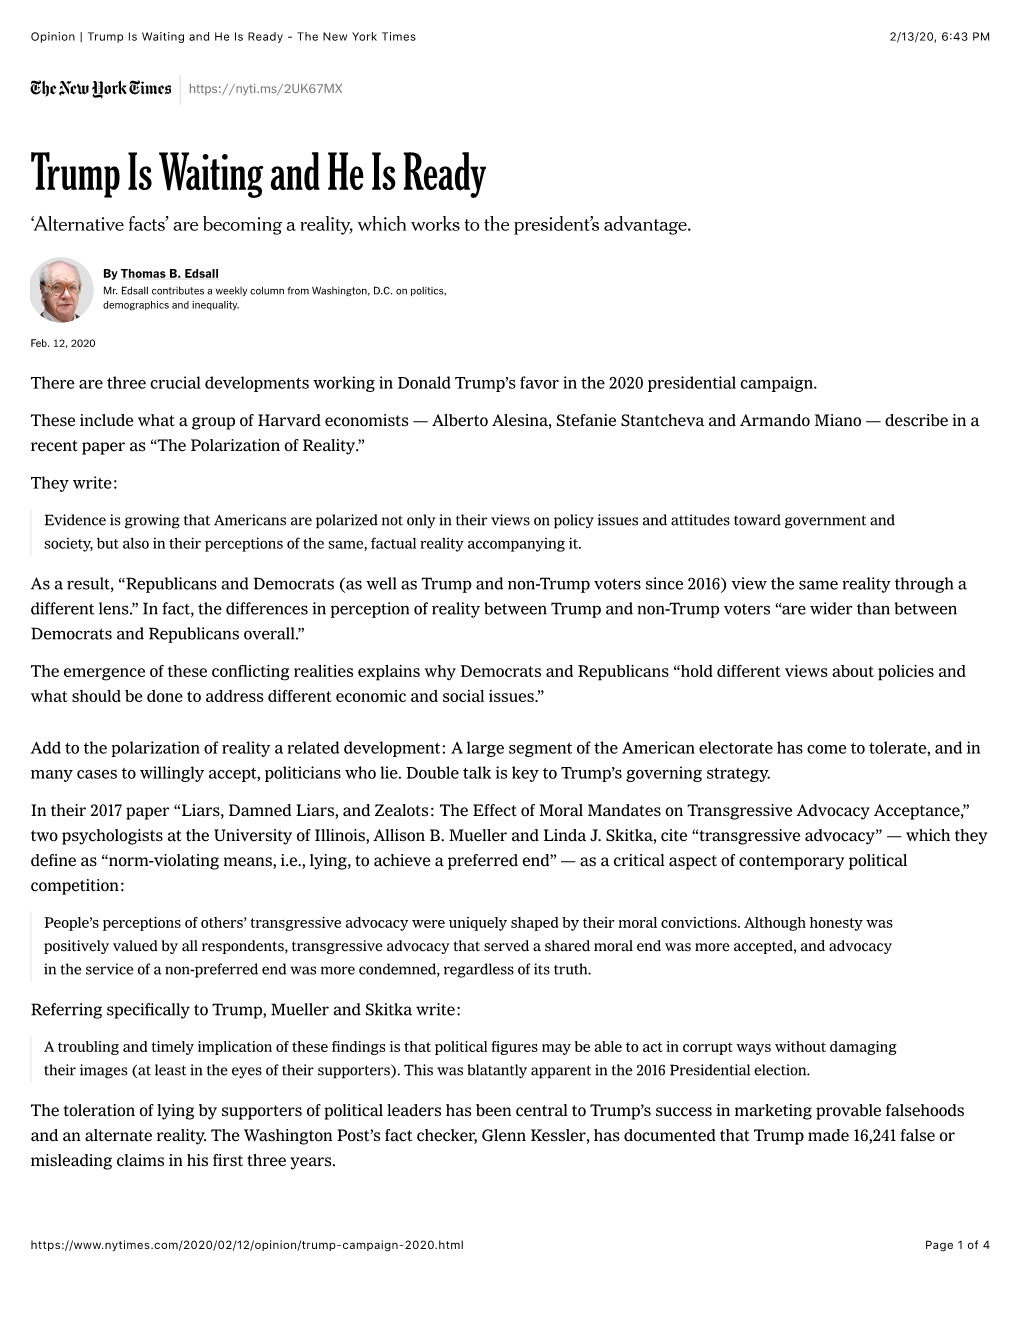 Opinion | Trump Is Waiting and He Is Ready - the New York Times 2/13/20, 6:43 PM